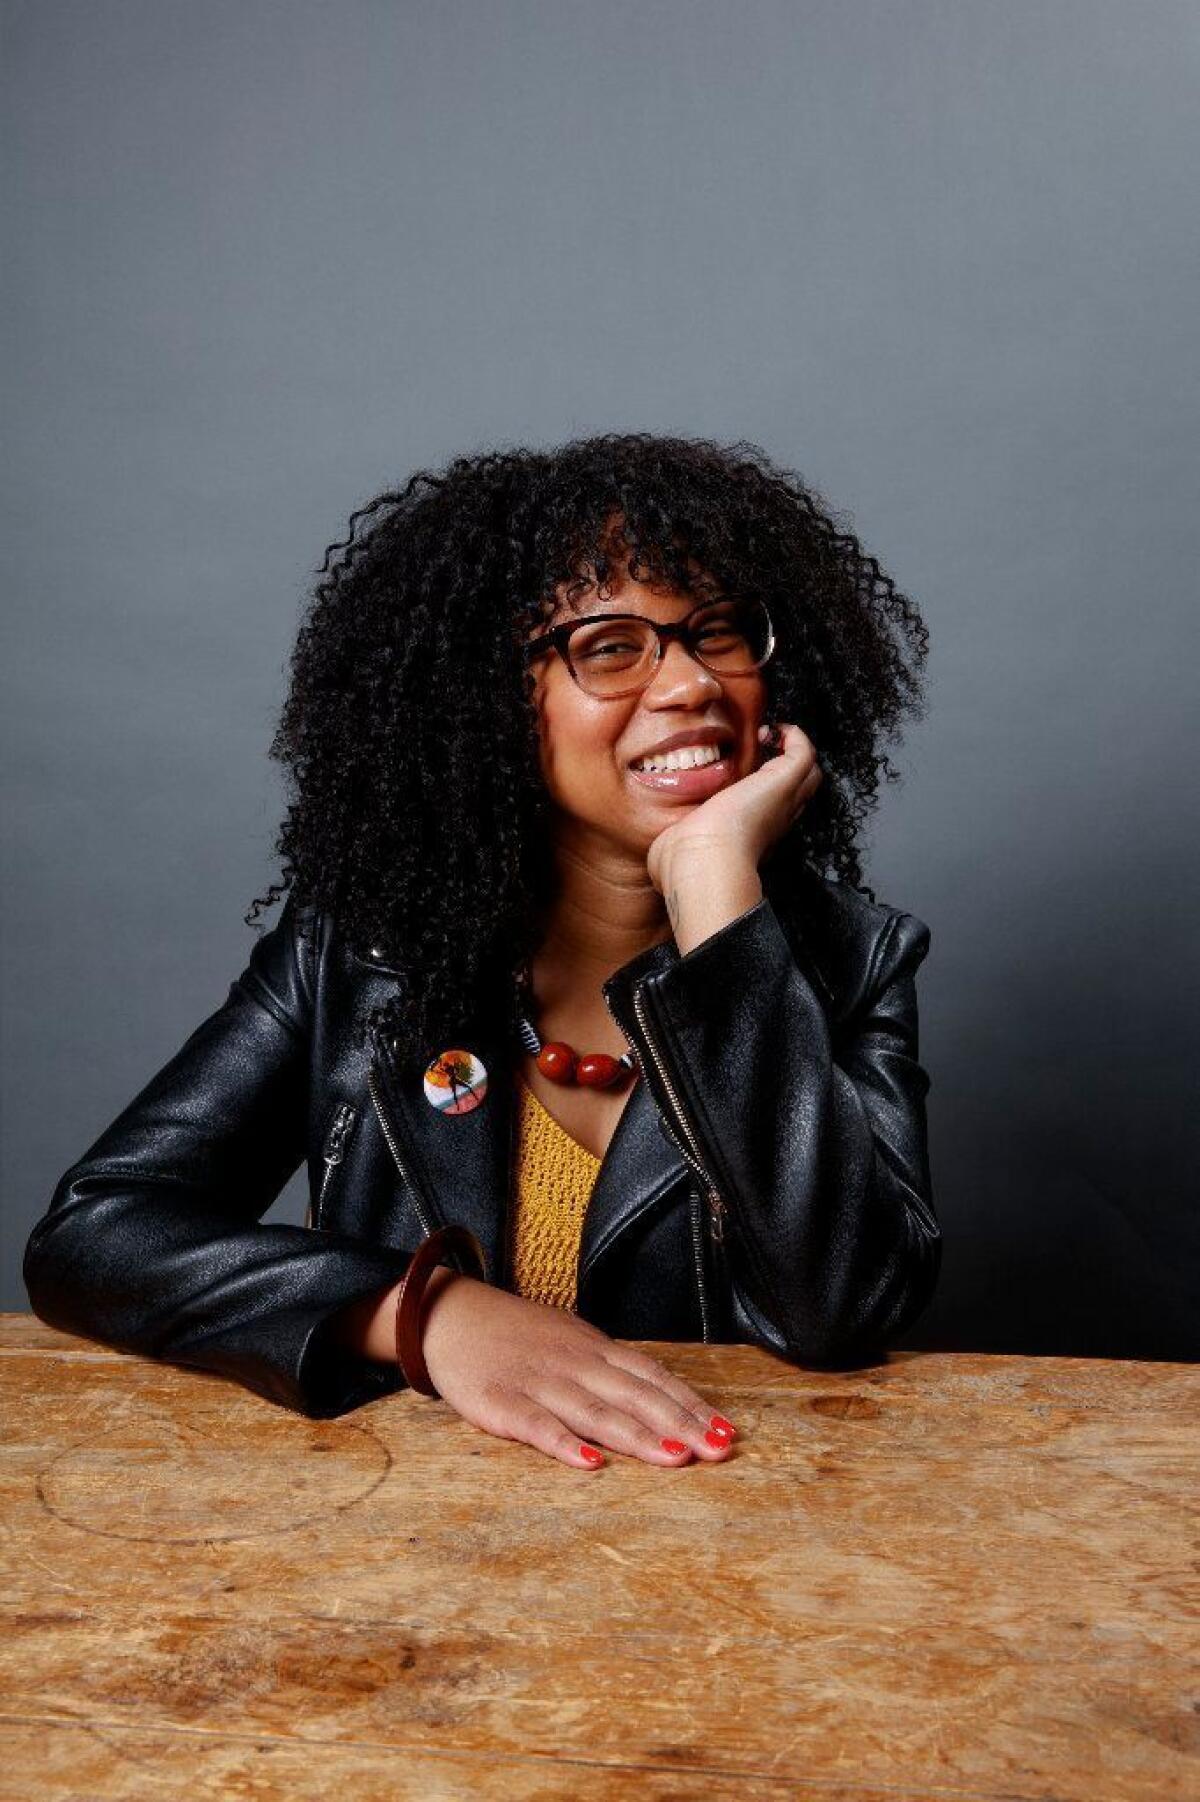 "I feel like I’ve always been a storyteller, but coming into my own as a writer is still happening," says Glory Edim, author of "Well-Read Black Girl: Finding Our Stories, Discovering Ourselves."